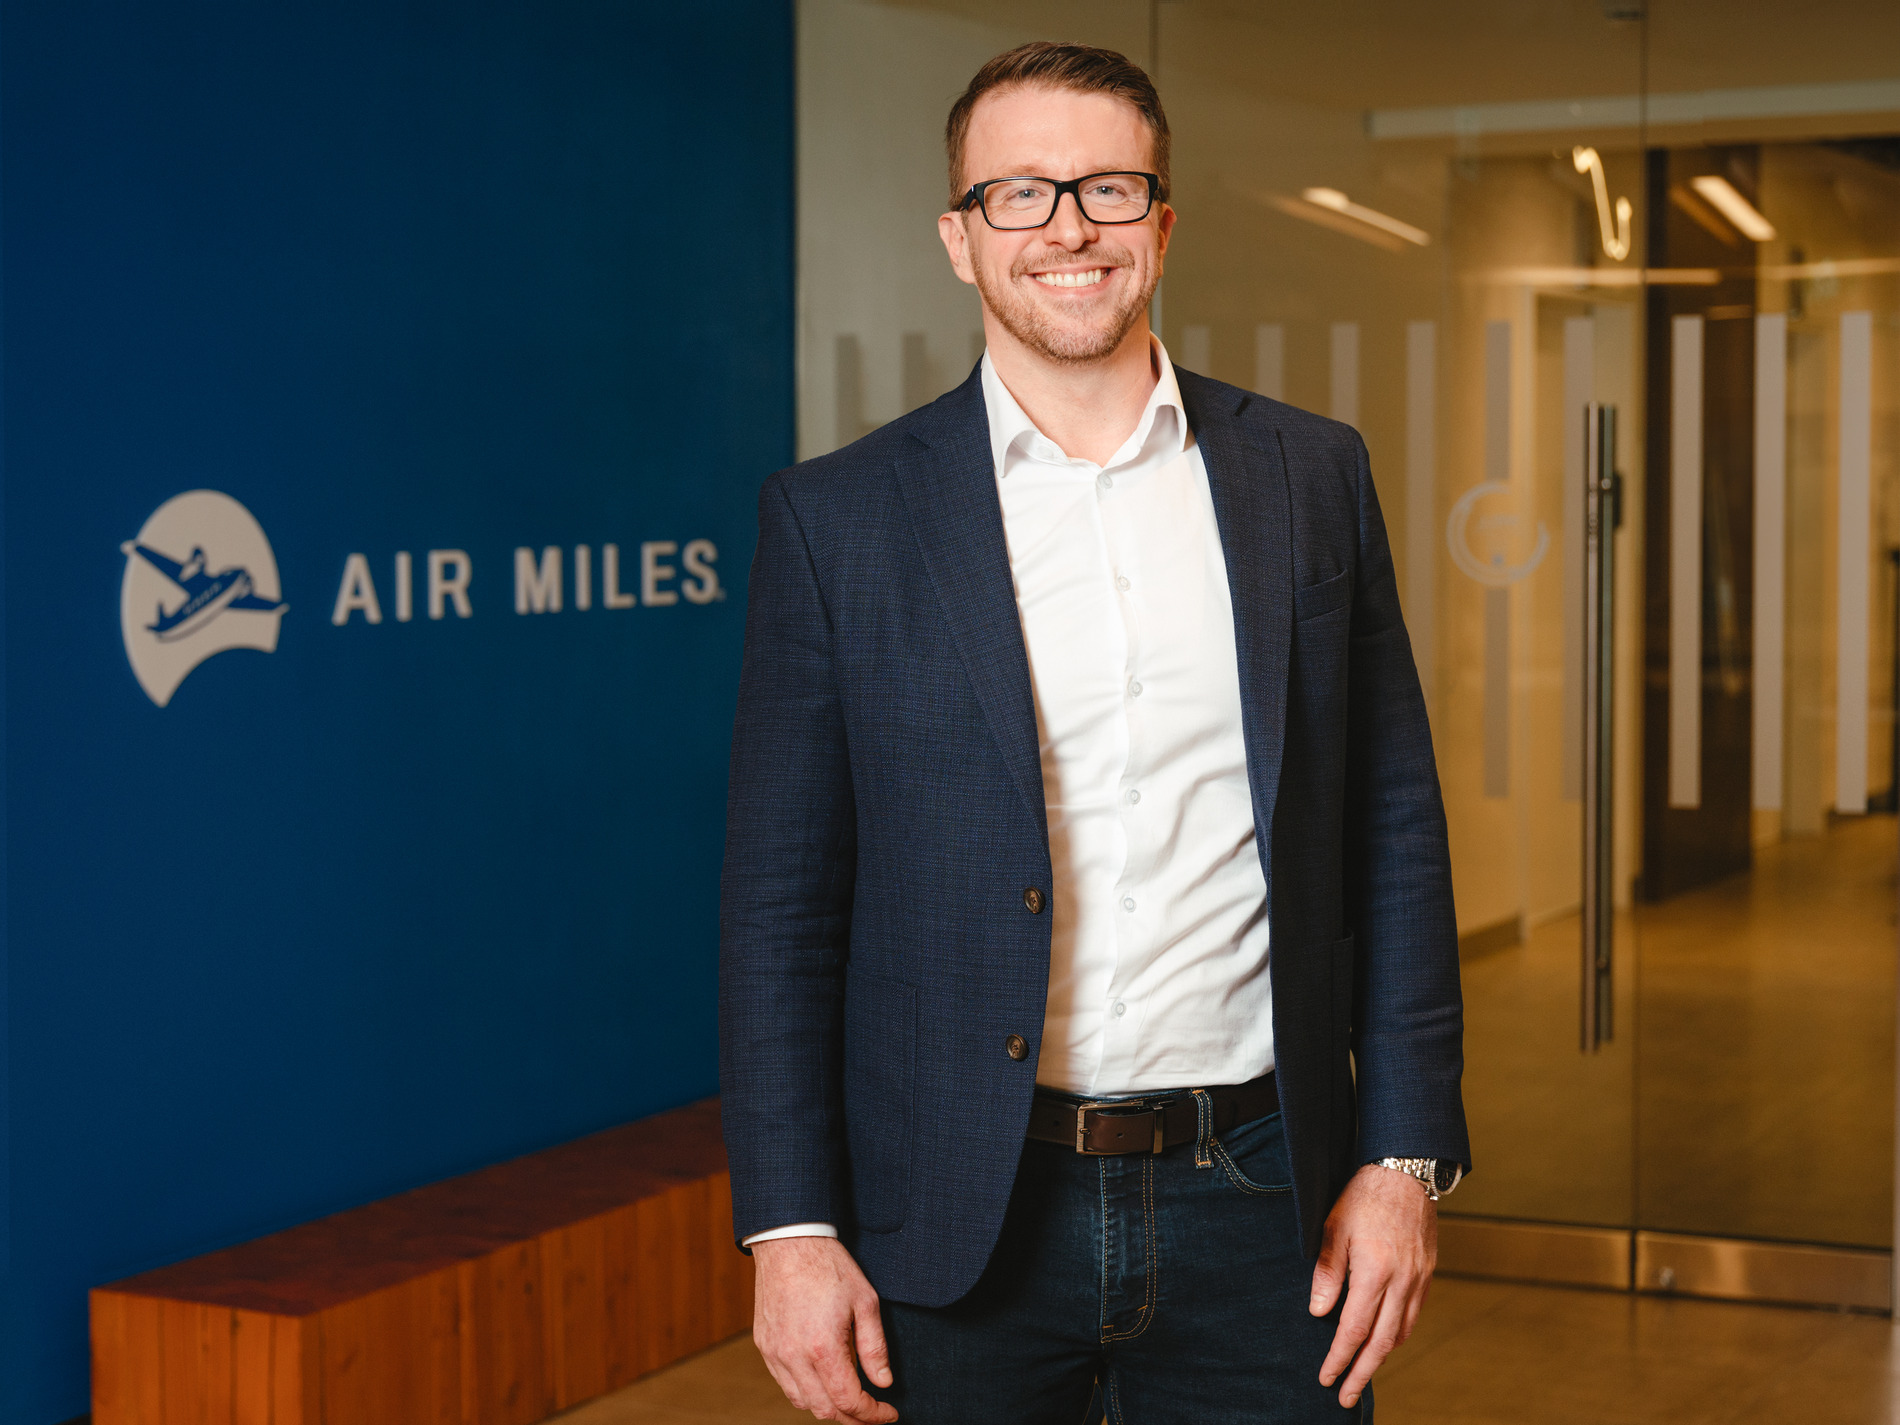 Shawn Stewart in a white button up shirt and navy jacket and jeans standing and smiling in front of an AIR MILES sign.